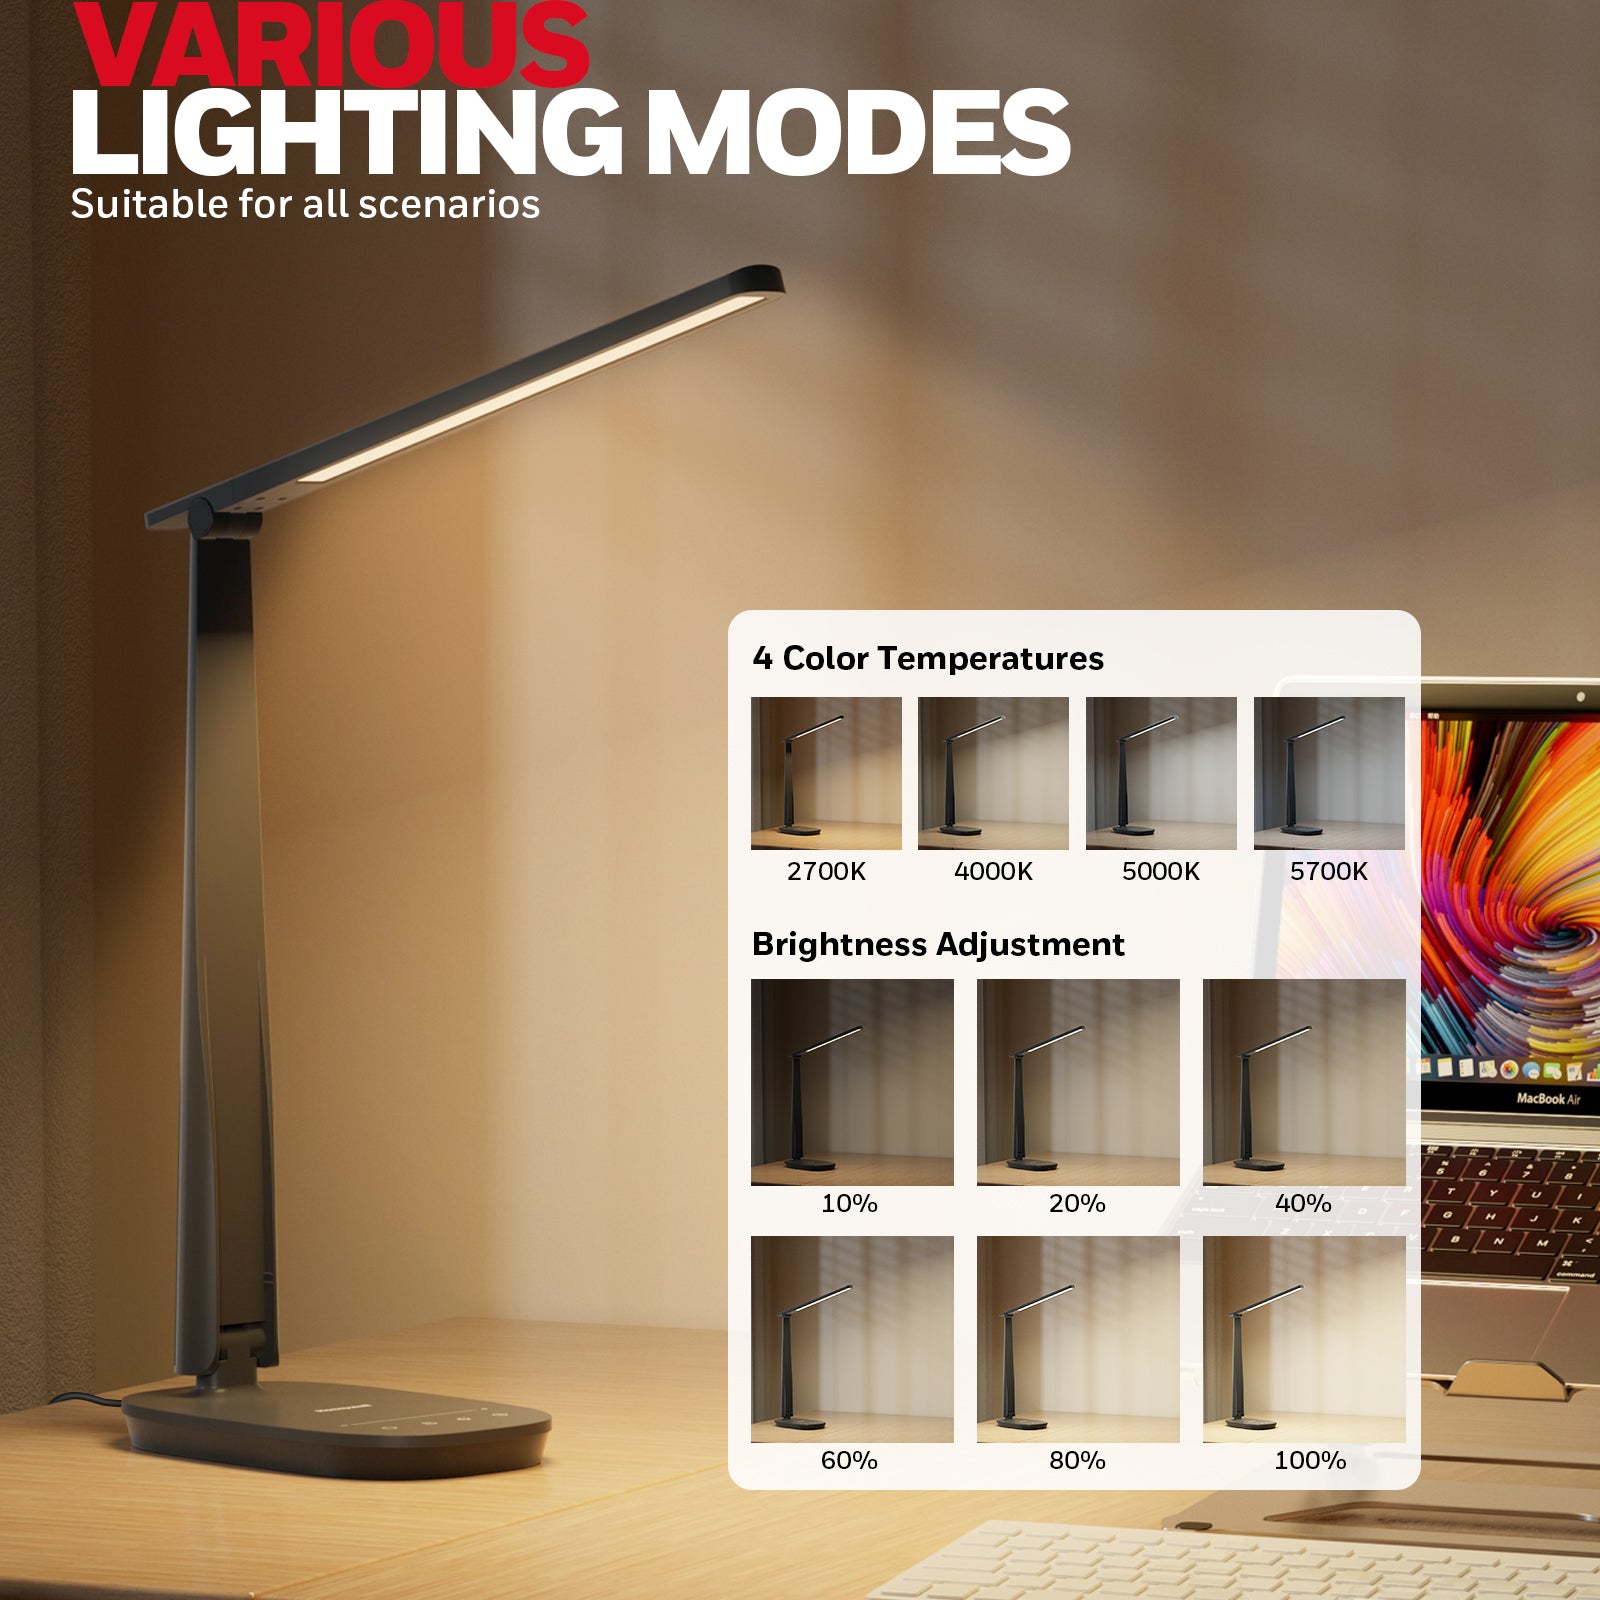 Honeywell Desk Lamp with USB Charging Port - Sunturalux™ H2 Dimmable Eye Caring LED Table Lamp